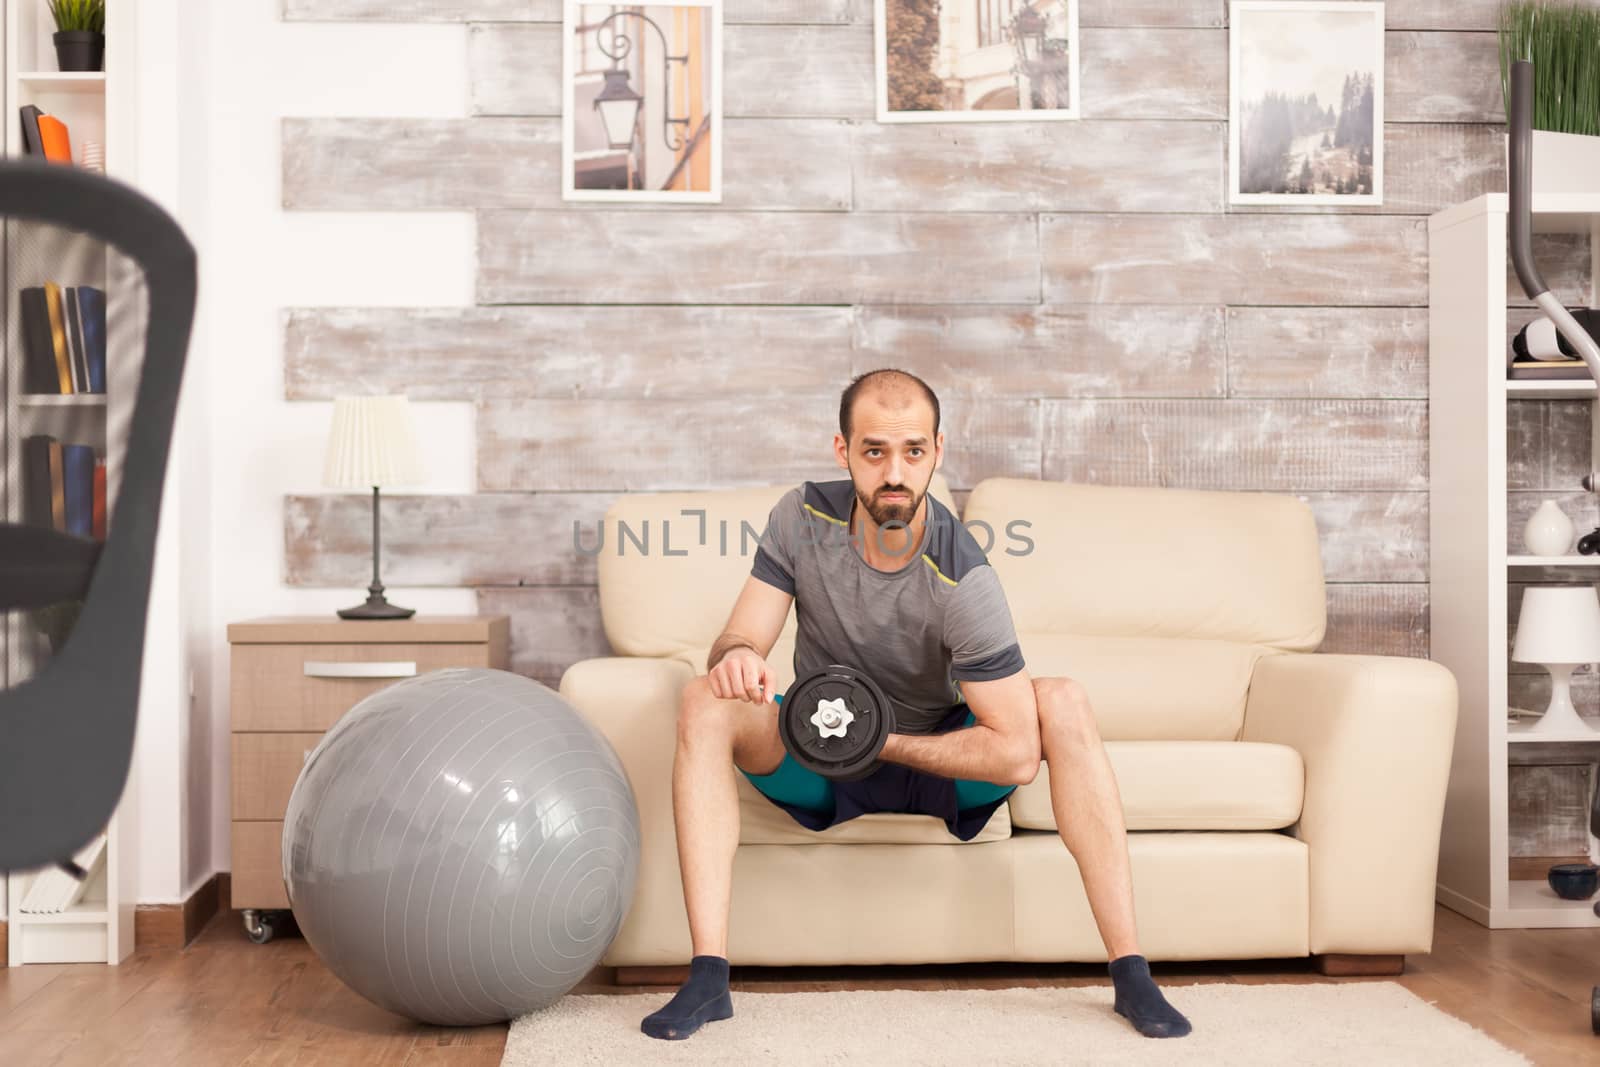 Athletic man using dumbbells to train biceps at home during covid-19 self isolation.